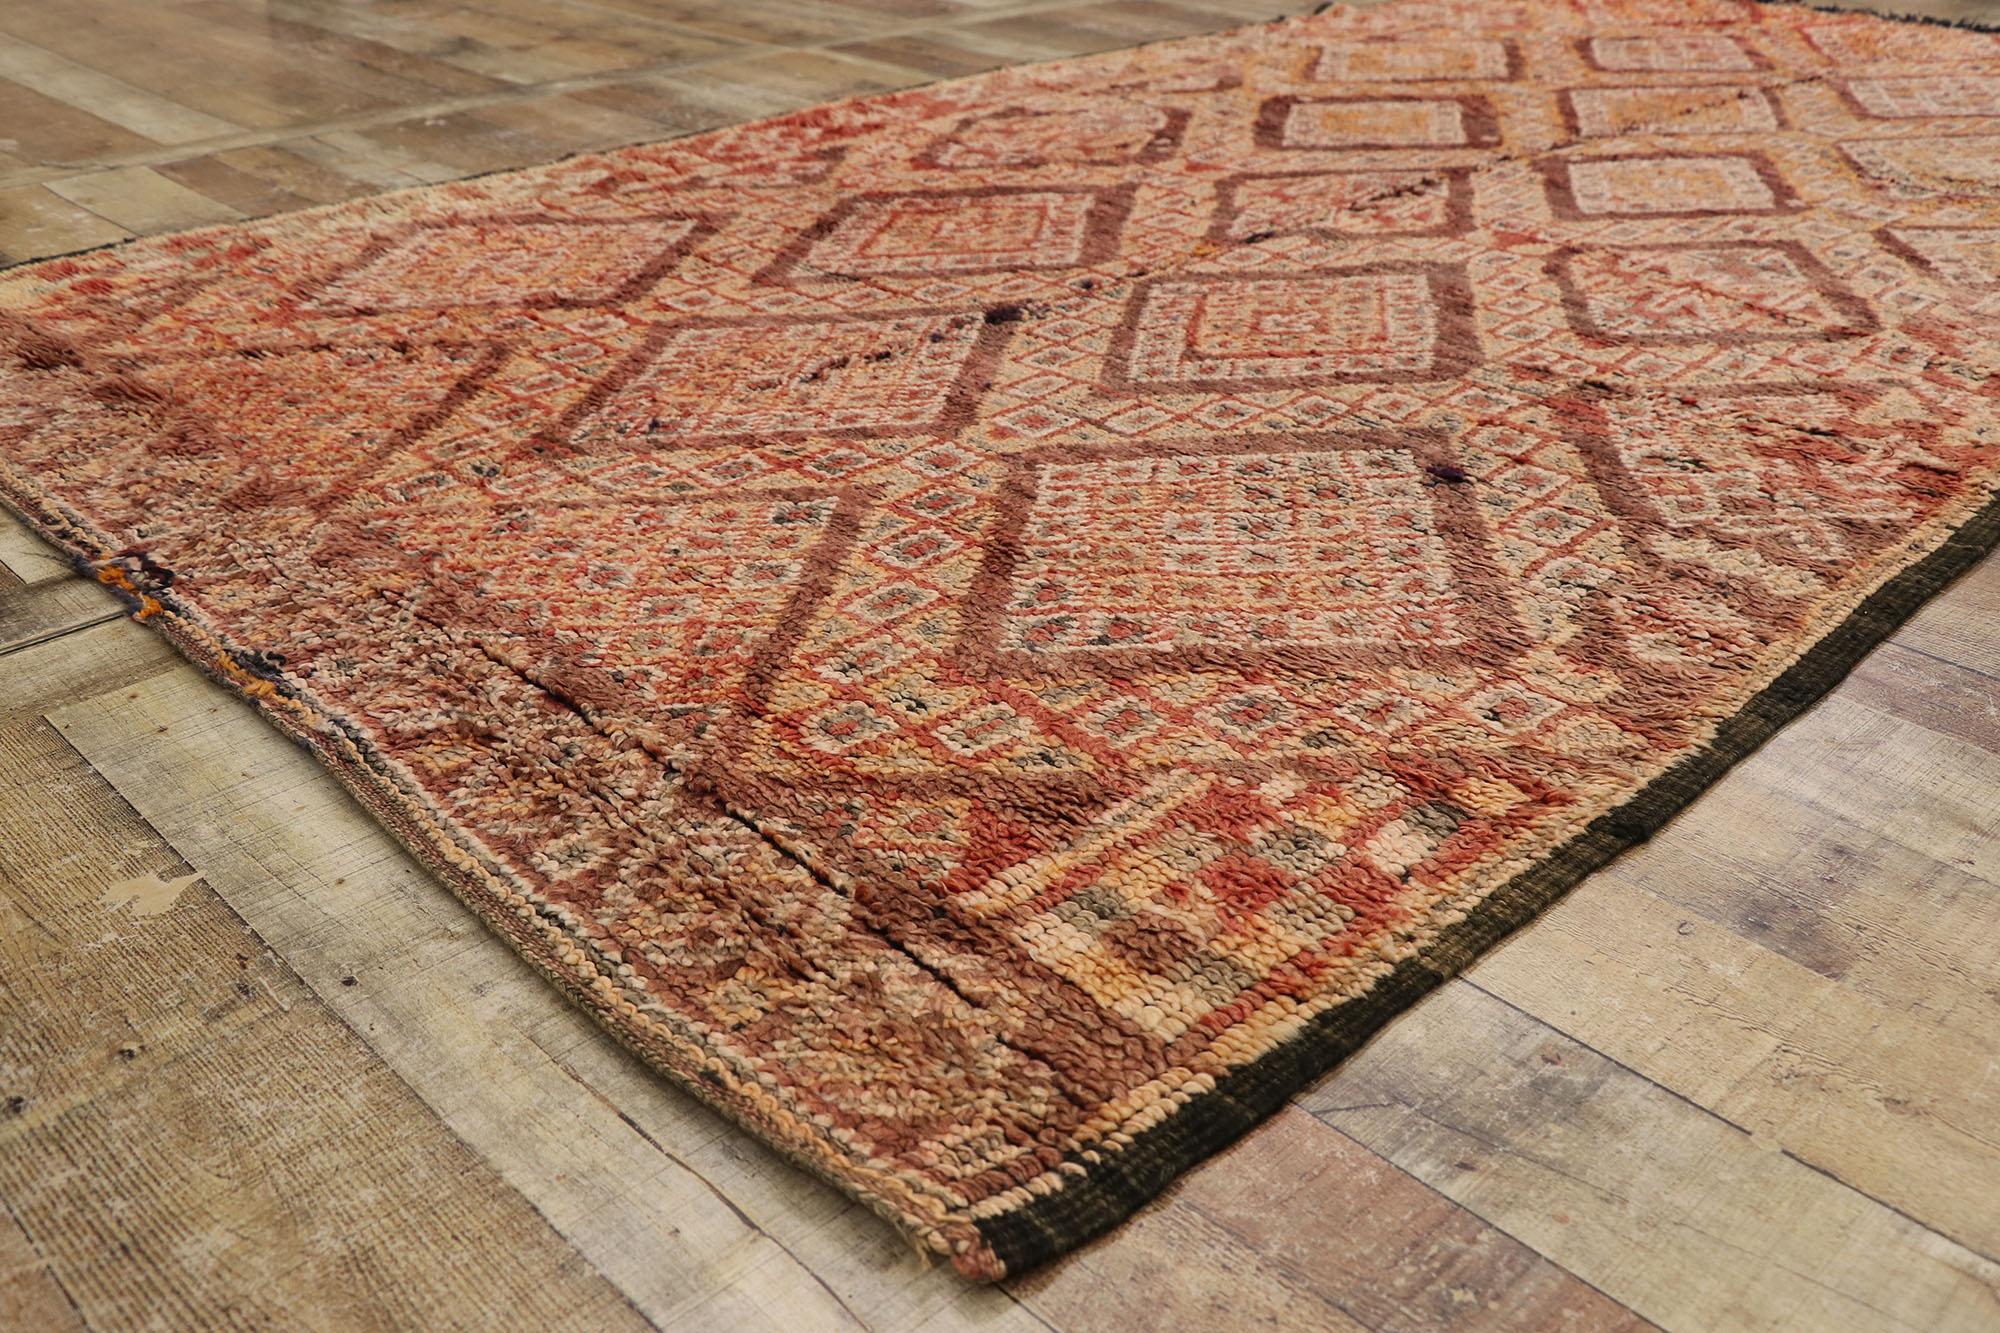 20th Century Vintage Beni MGuild Moroccan Rug by Berber Tribes of Morocco For Sale